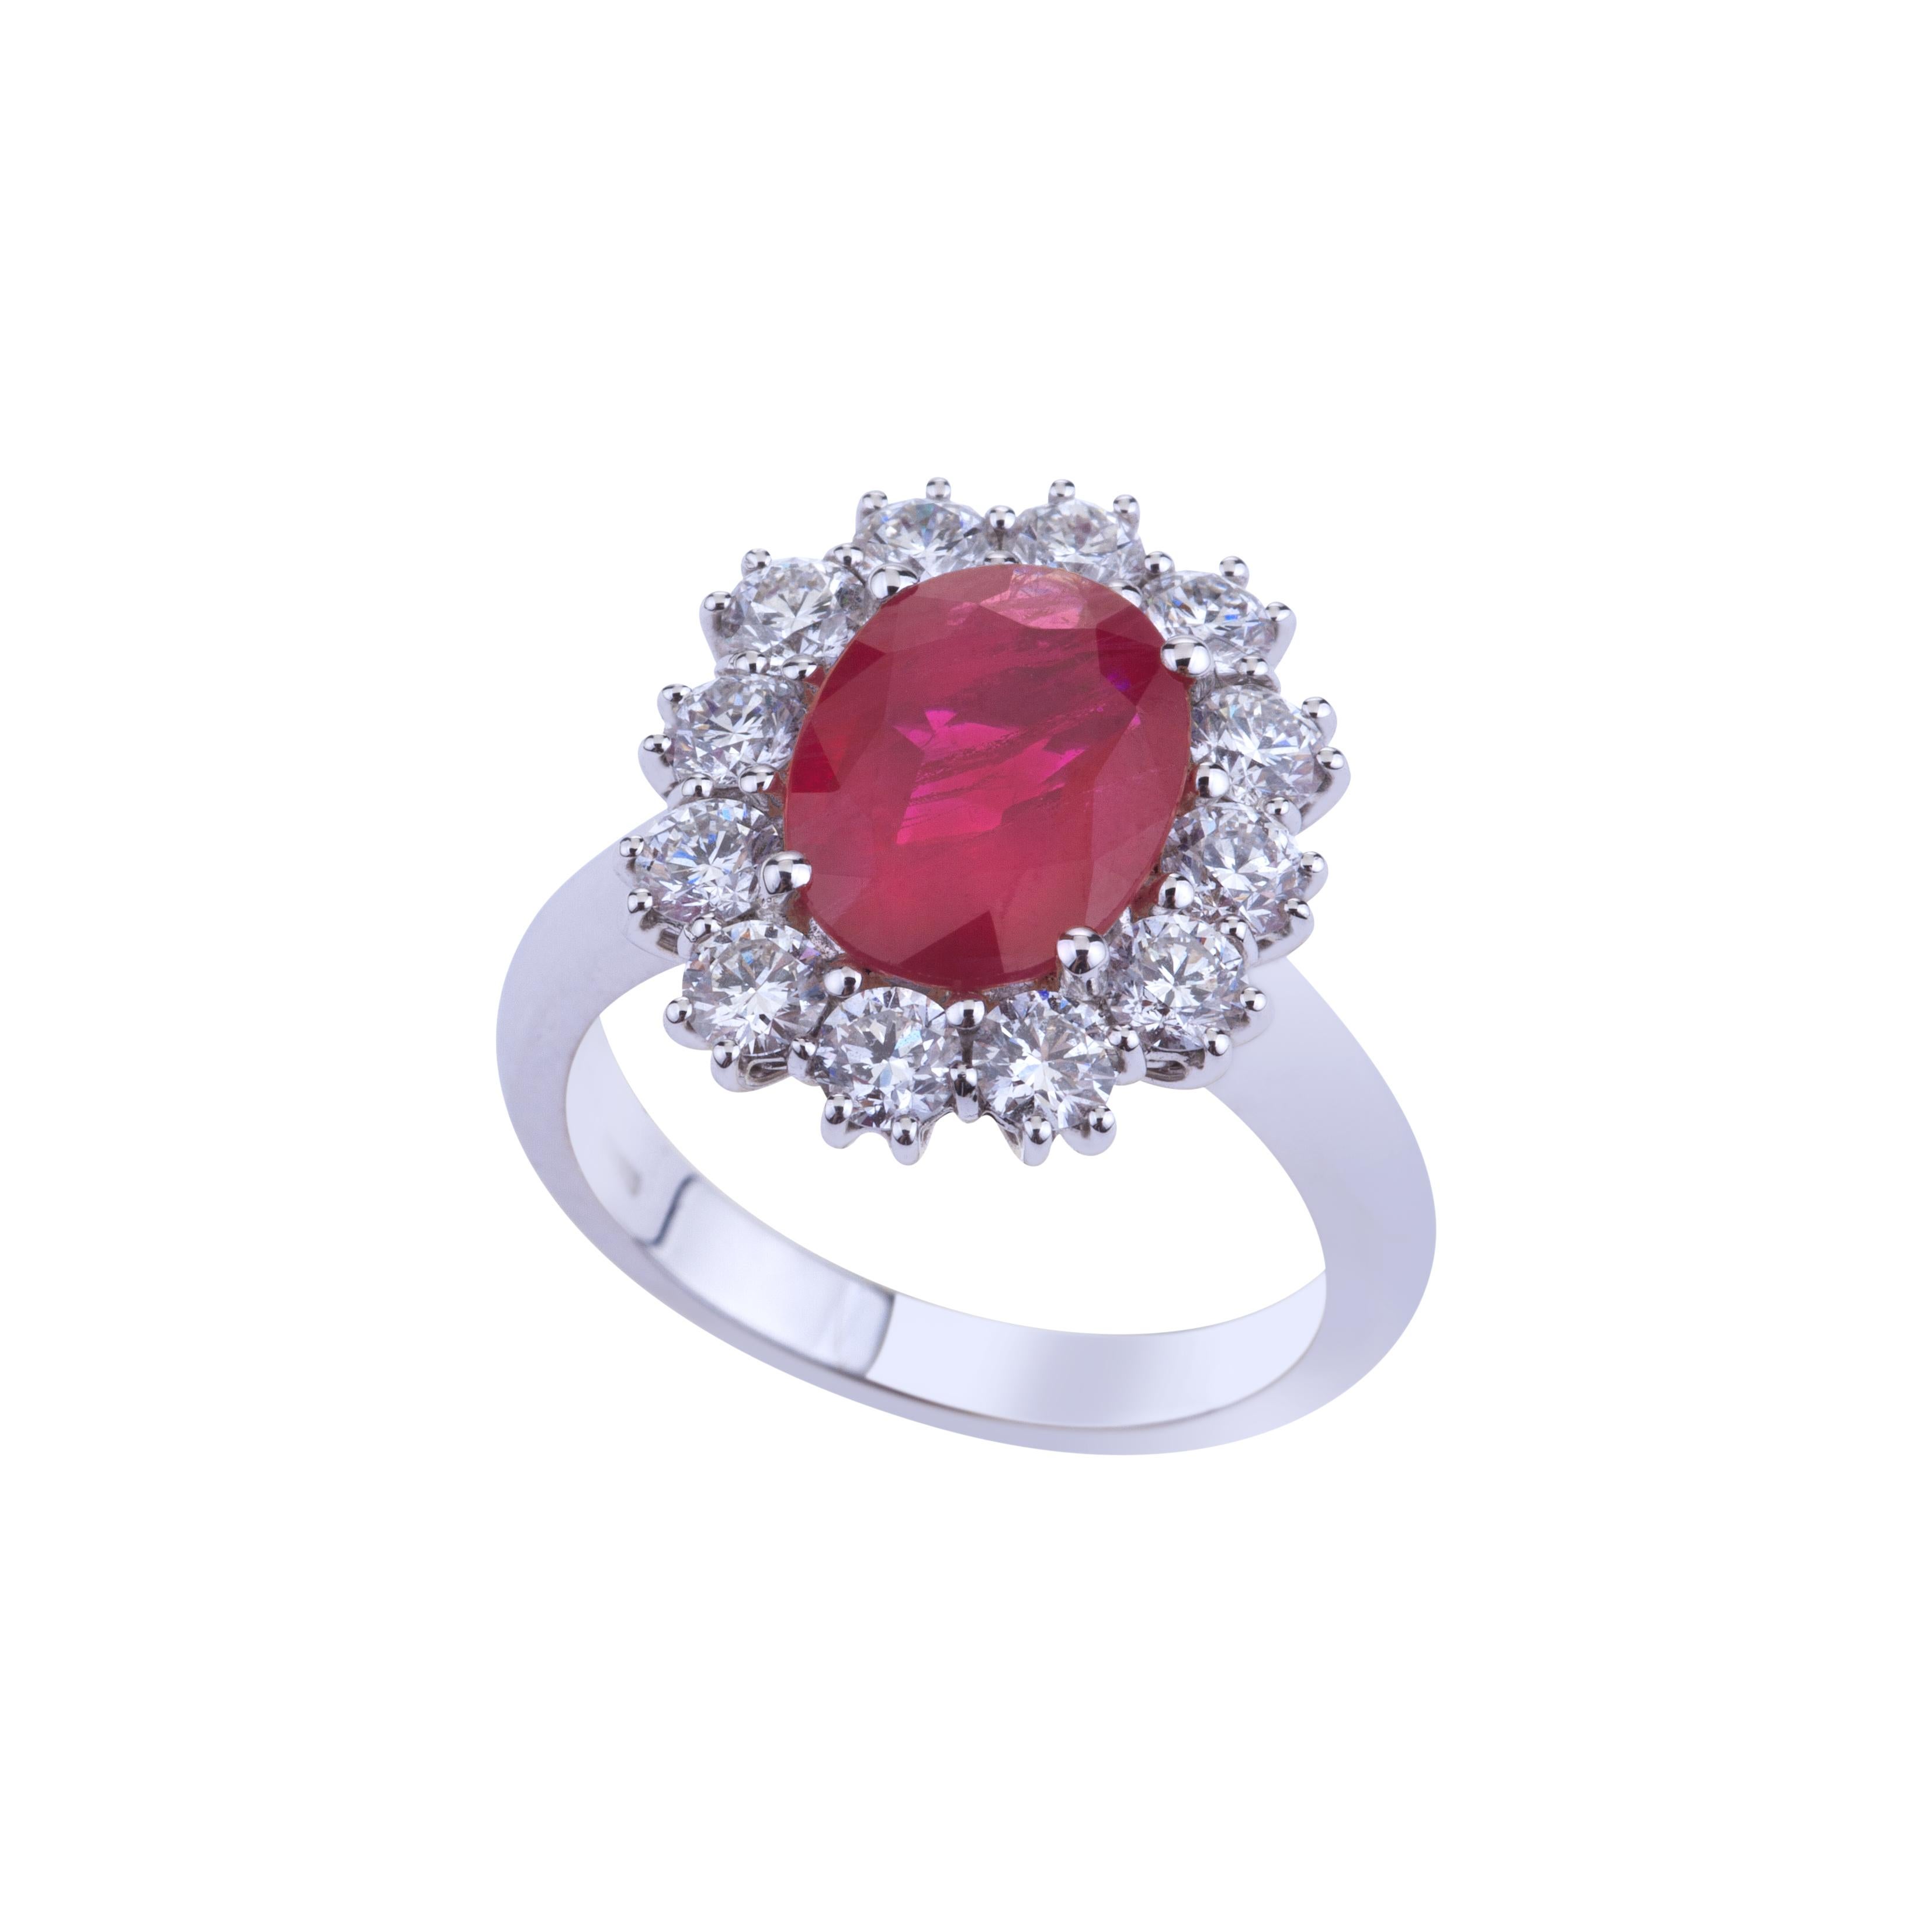 Oval Burma Ruby with Round Diamonds White Gold Ring with Certificate.
Classic Design for this Ring with a Stunning Oval Ruby (ct. 3.02 Certificate 11.15x8.27x3.72 faceted gemstone red oval/mixed cut) origin Burma with Round  Diamonds (ct. 1.5) for